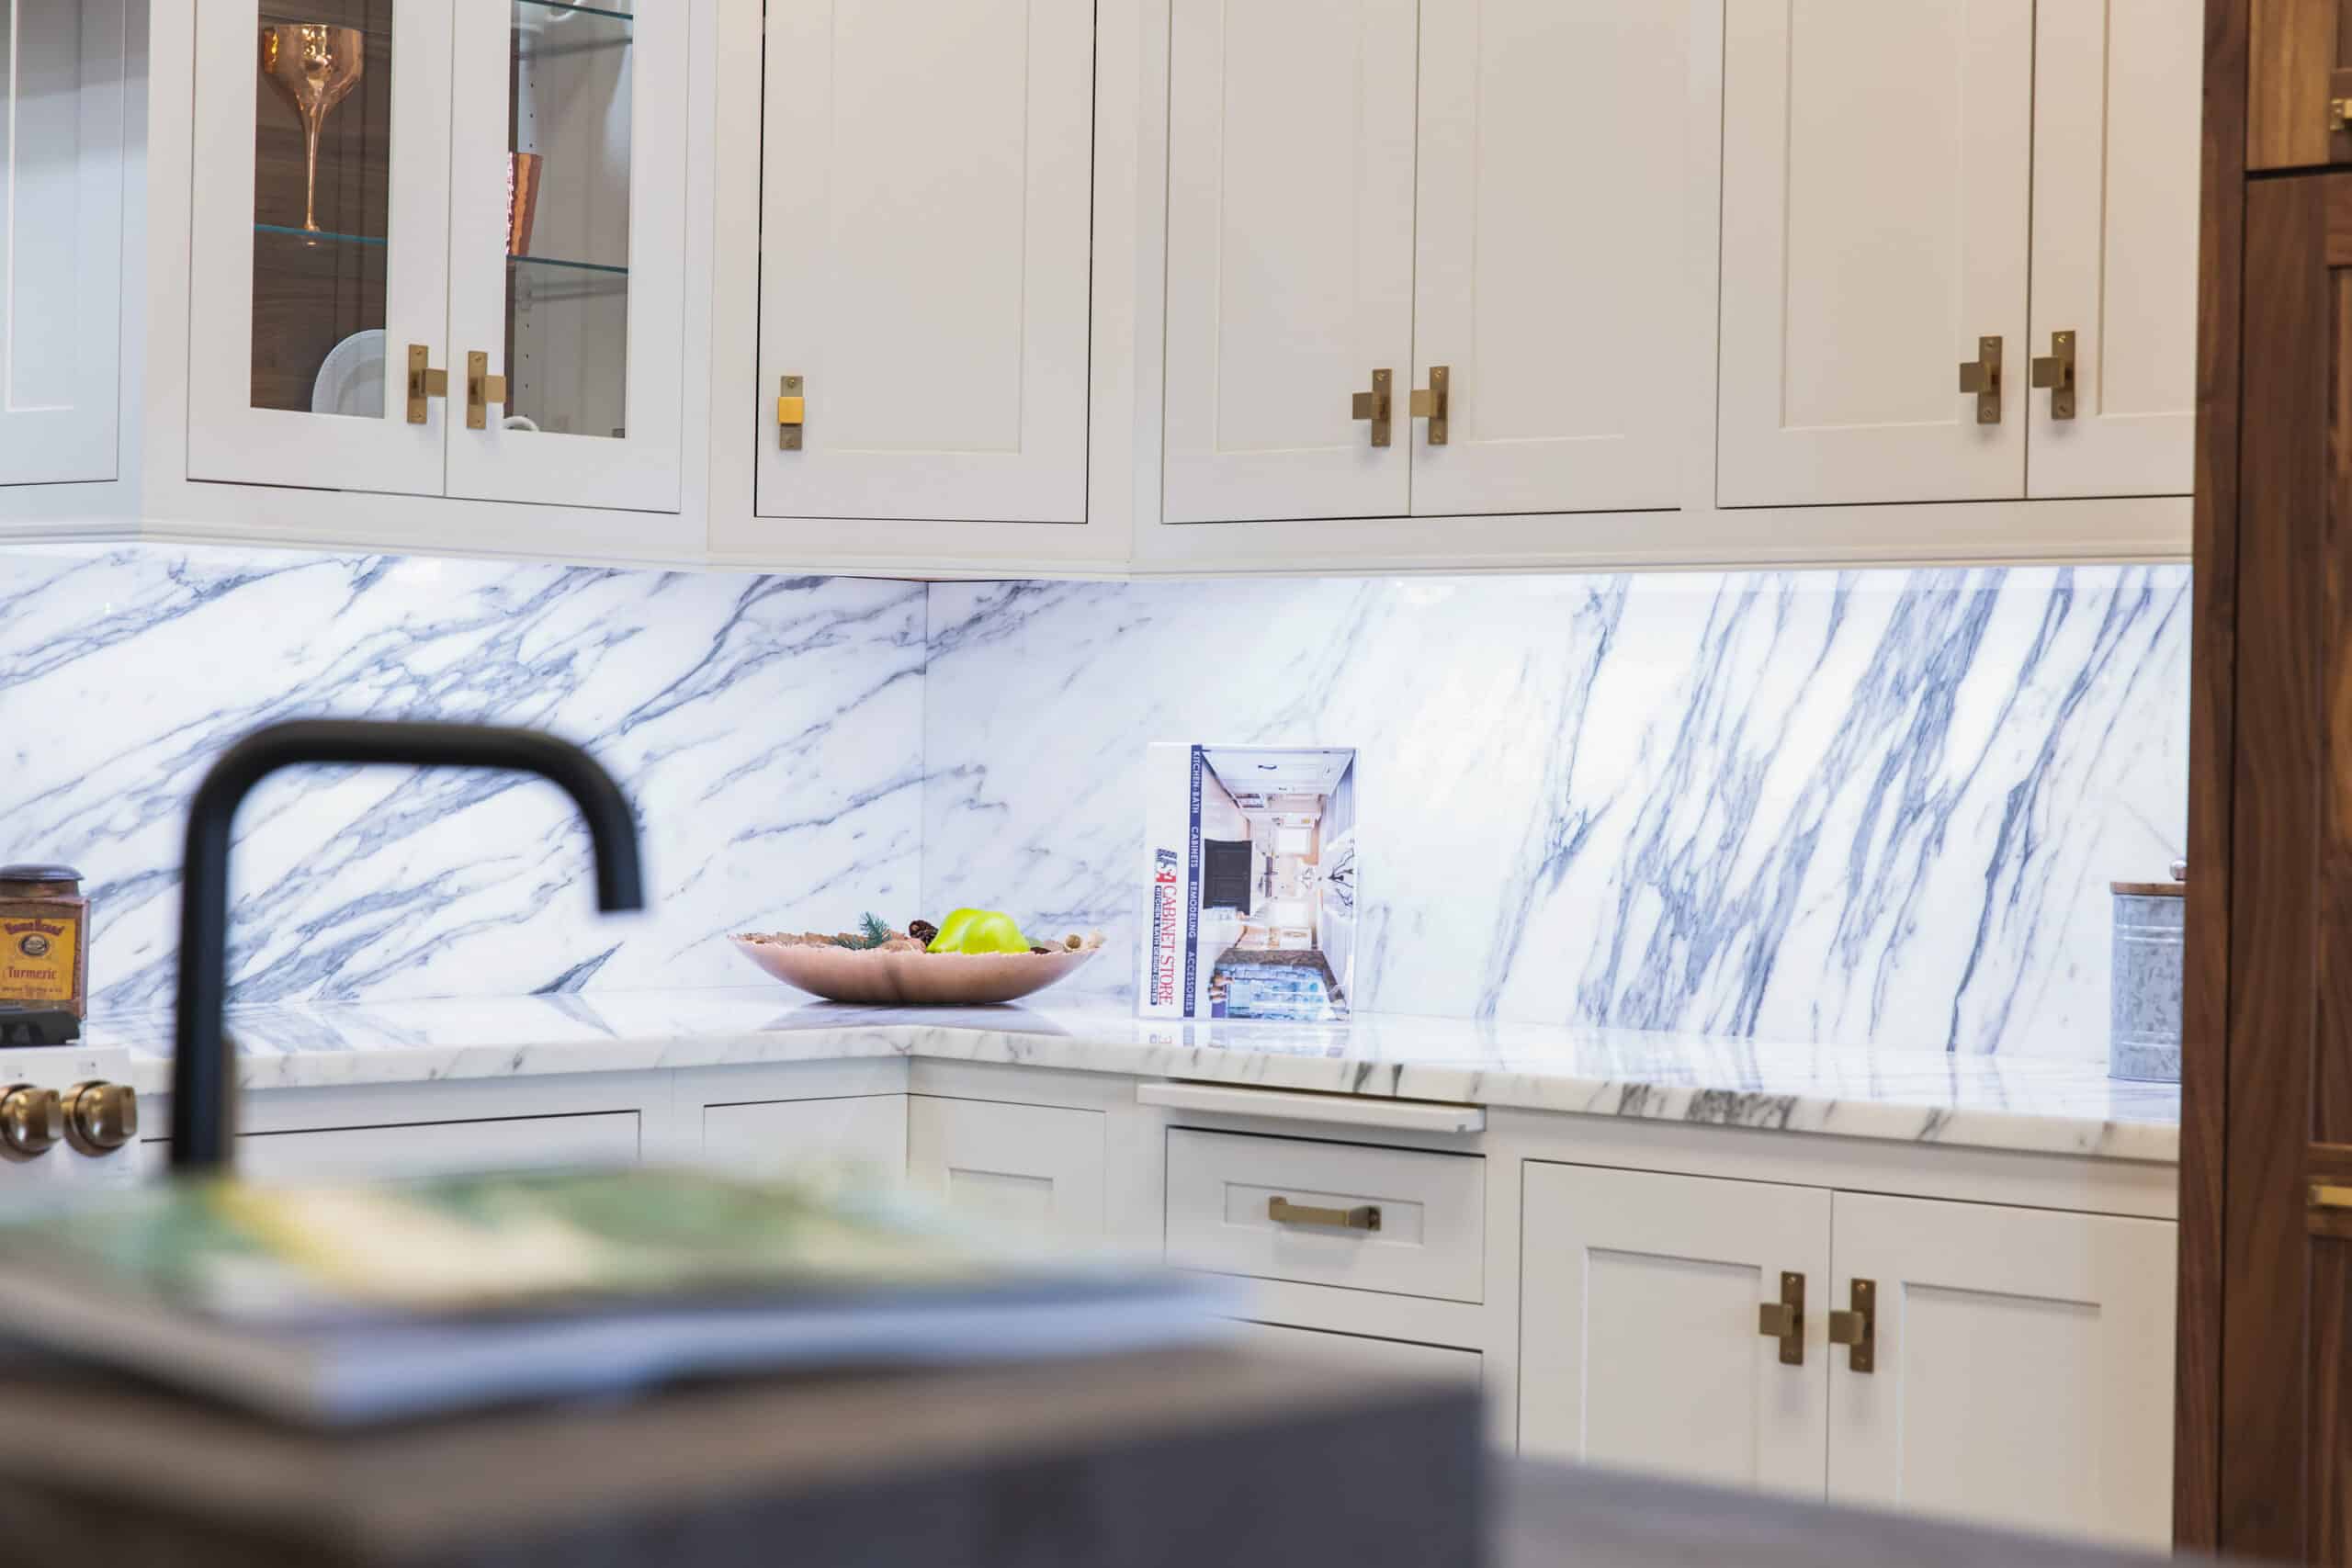 A modern kitchen with sleek marble countertops and pristine white cabinets